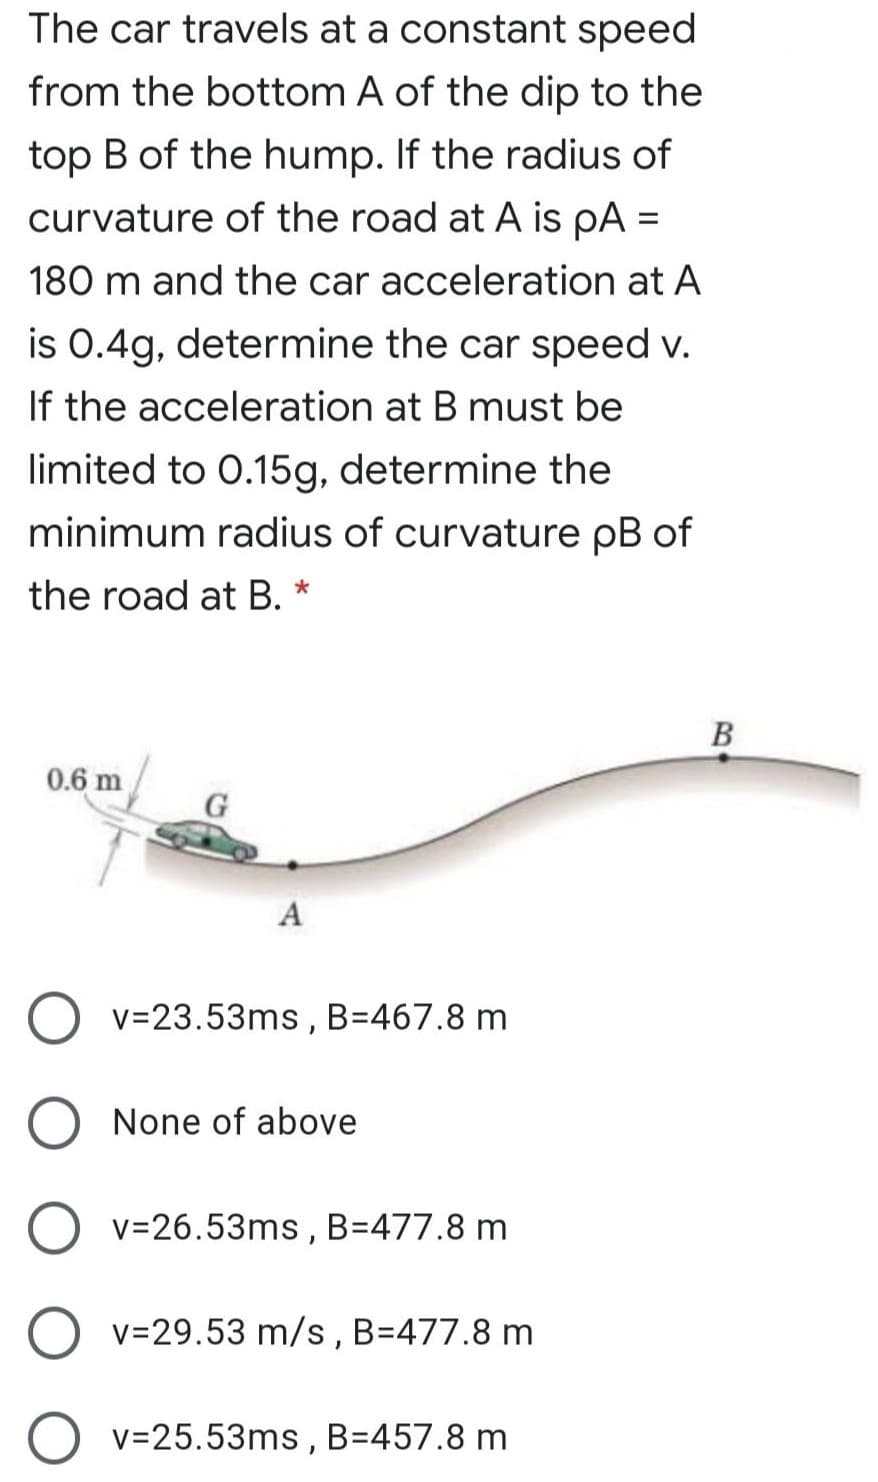 The car travels at a constant speed
from the bottom A of the dip to the
top B of the hump. If the radius of
curvature of the road at A is pA =
180 m and the car acceleration at A
is 0.4g, determine the car speed v.
If the acceleration at B must be
limited to 0.15g, determine the
minimum radius of curvature pB of
the road at B. *
0.6 m
A
v=23.53ms,
B=467.8 m
None of above
v=26.53ms , B=477.8 m
v=29.53 m/s, B=477.8 m
v=25.53ms , B=457.8 m
B.
